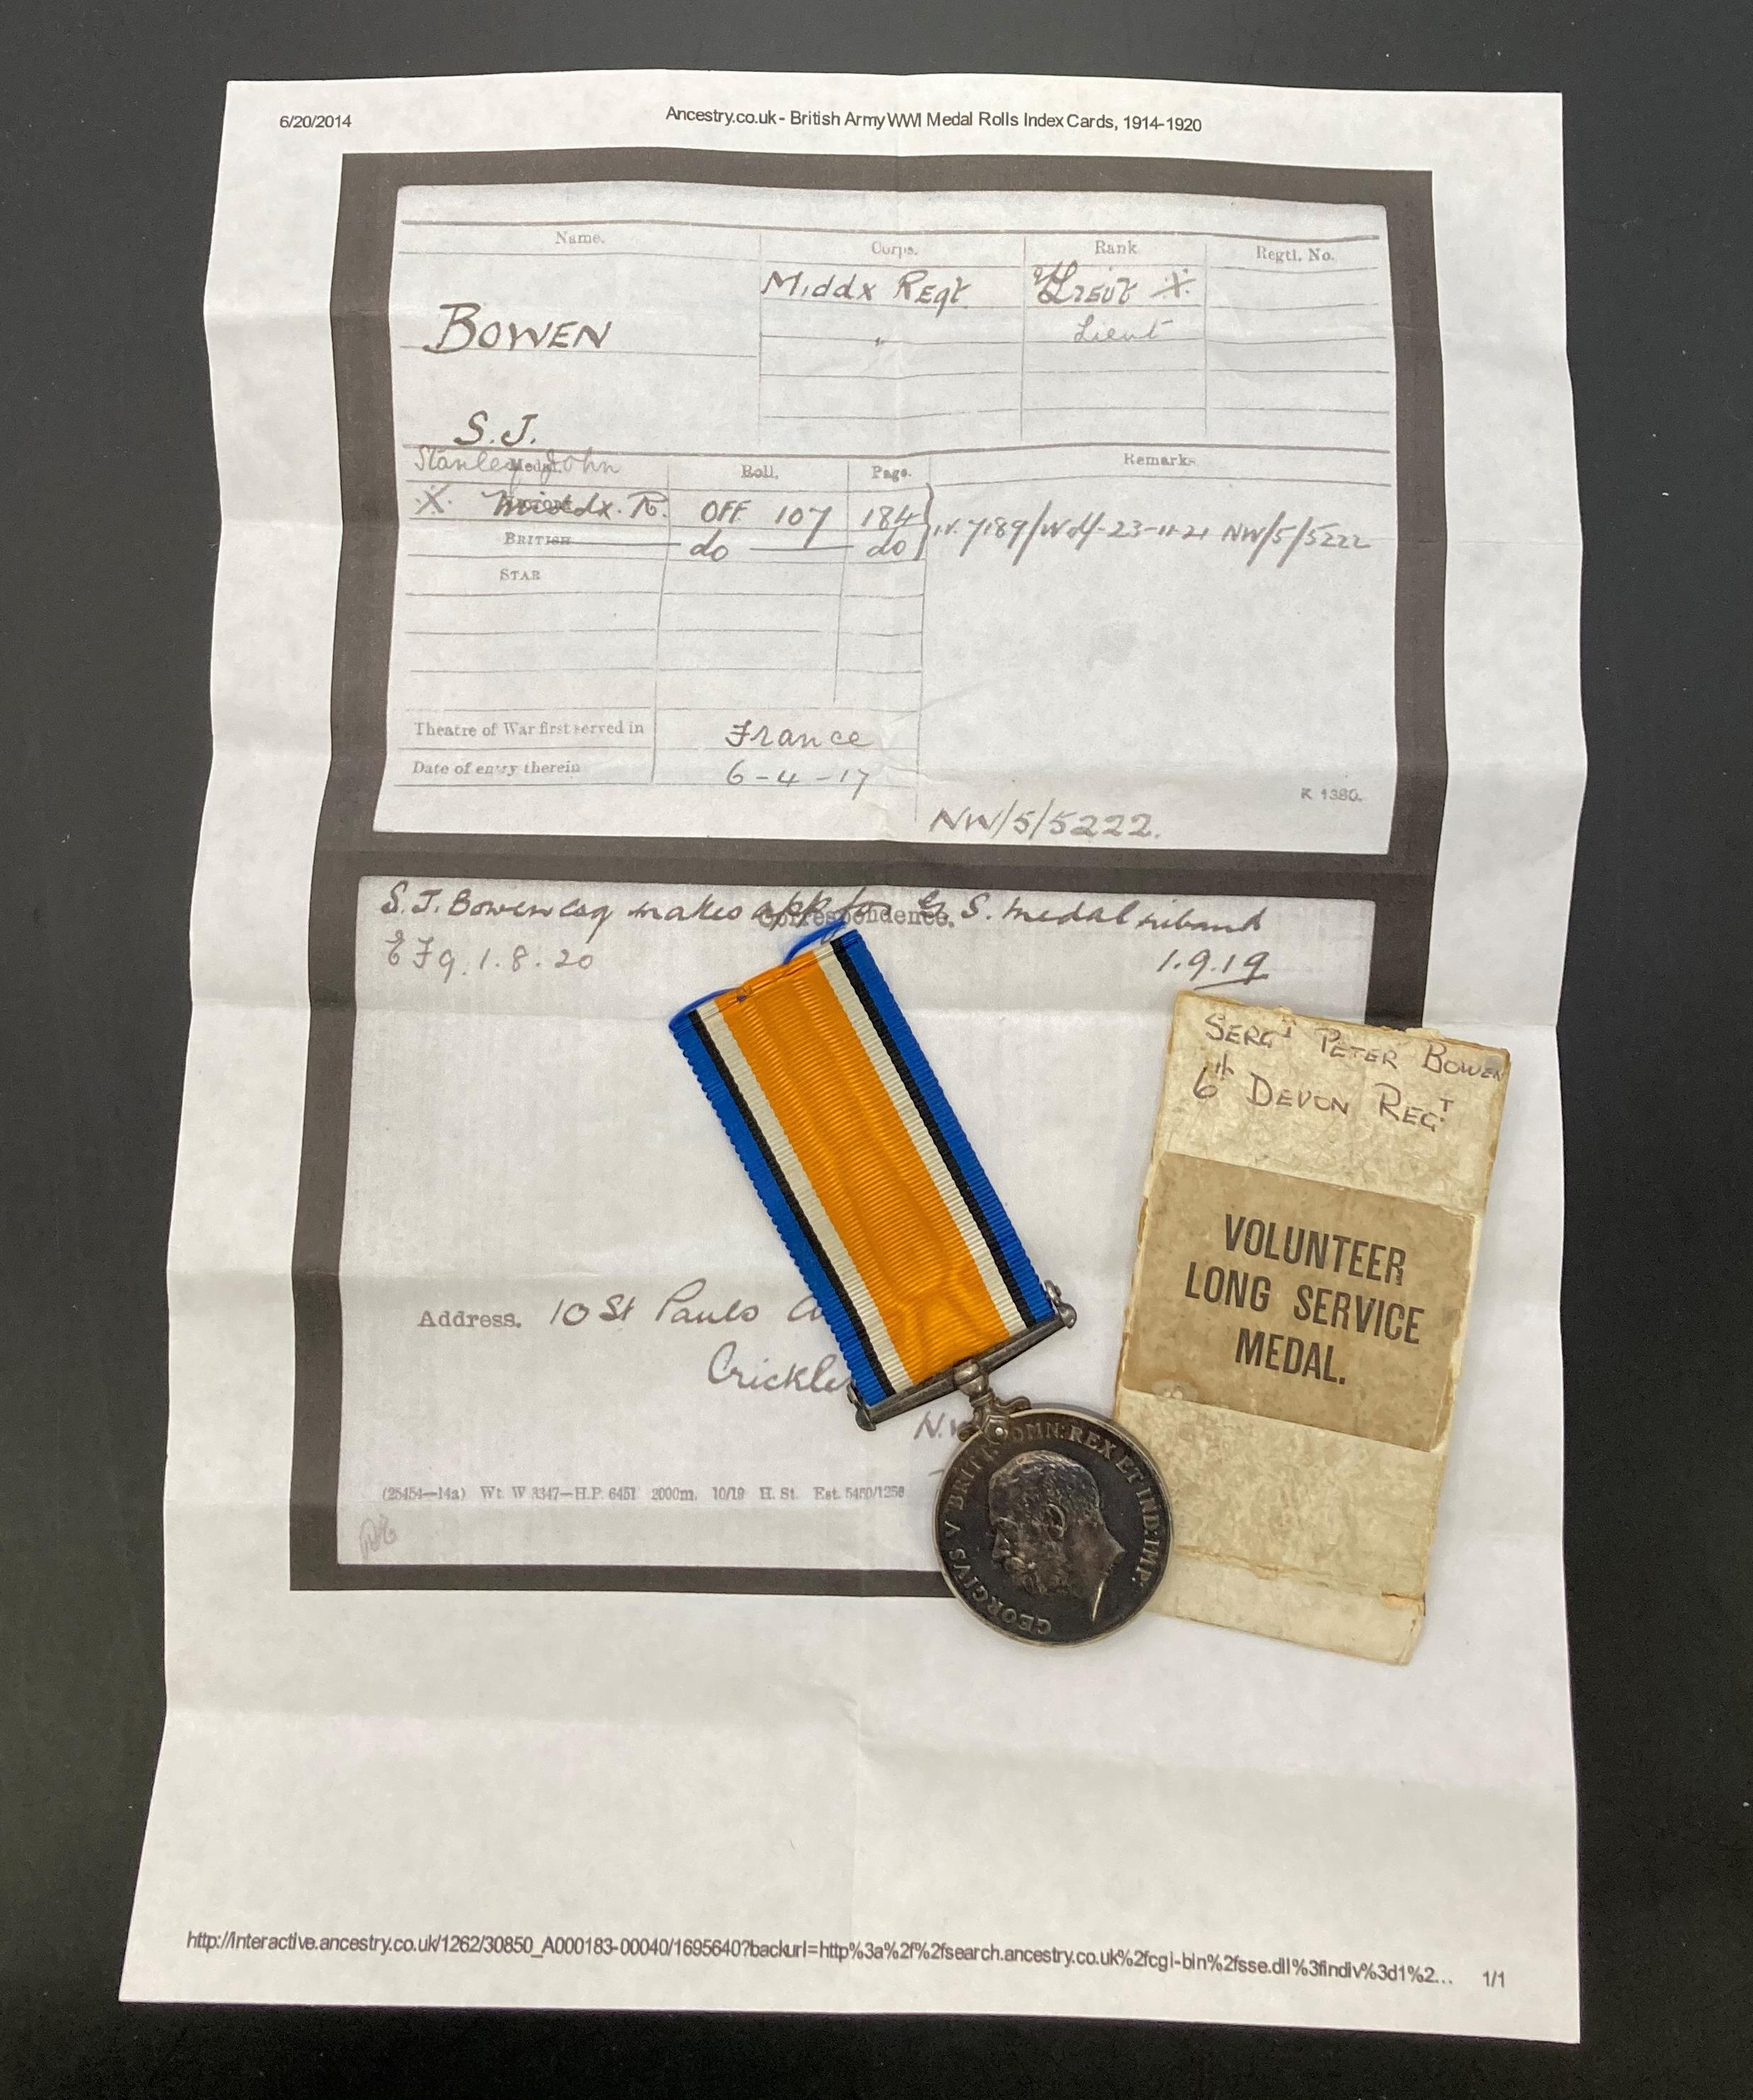 World War I War Medal complete with ribbon to 2 Lieut SJ Bowen (from Cricklewood, - Image 3 of 3